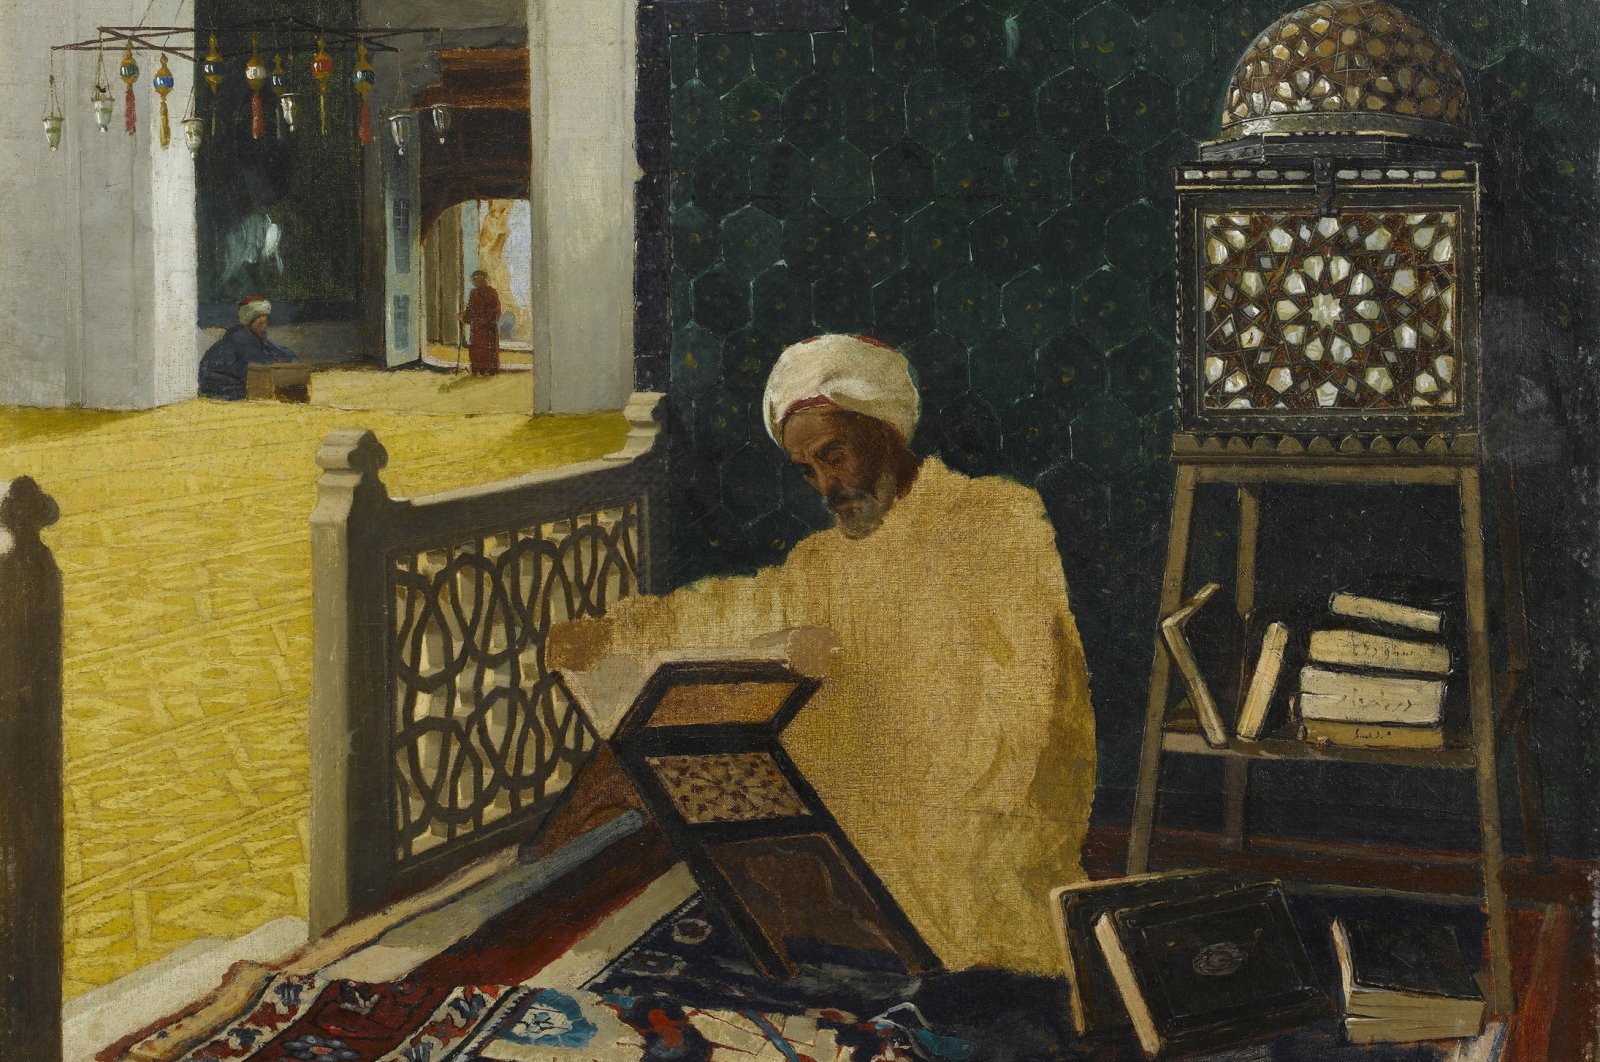 Turkish painter Osman Hamdi Bey's "Reciting the Quran" painting from the collection of Sakıp Sabancı Museum, Istanbul. (Photo by Fine Art Images/Heritage Images/Getty Images)